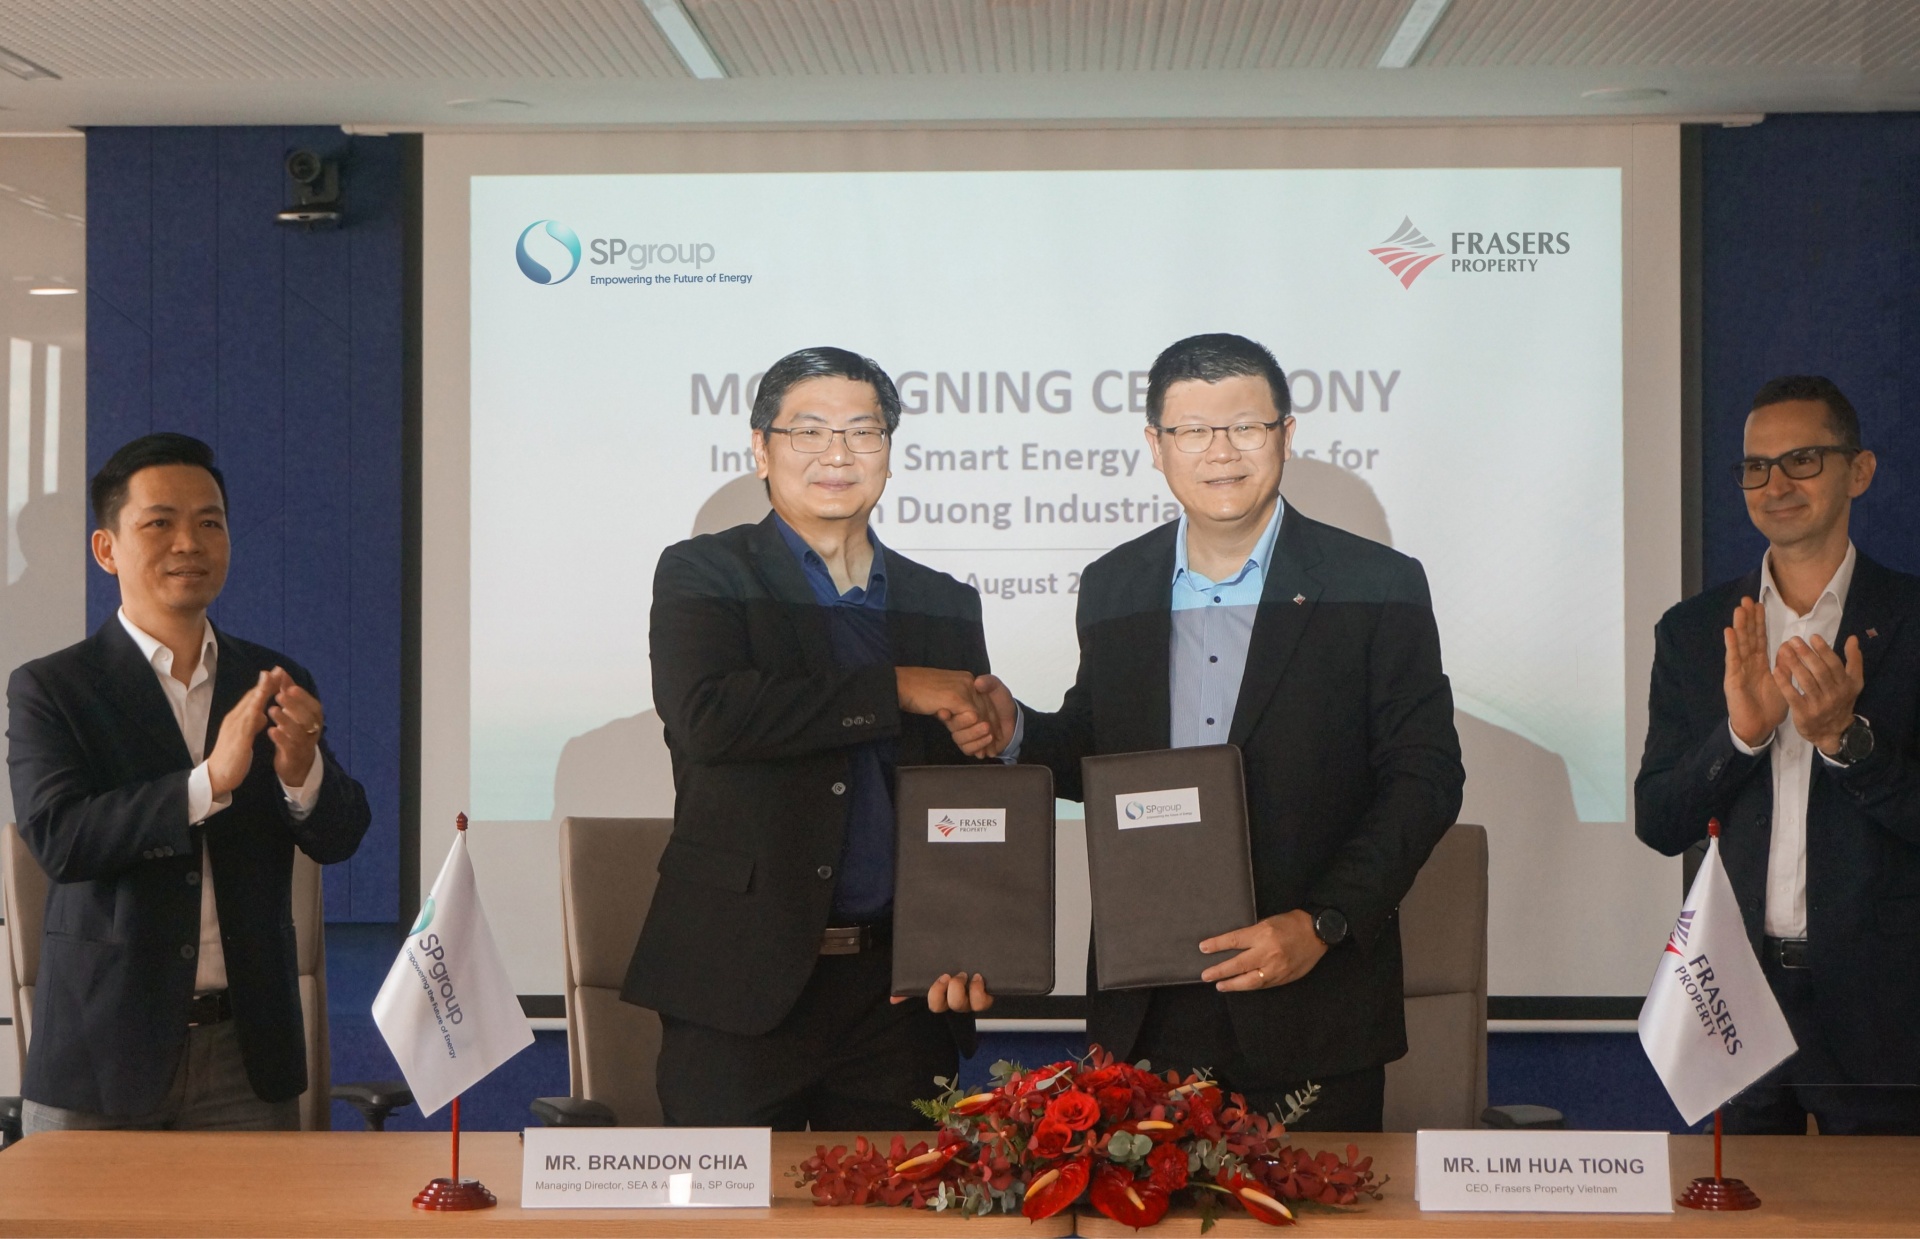 singapore duo implement smart energy solutions for binh duong